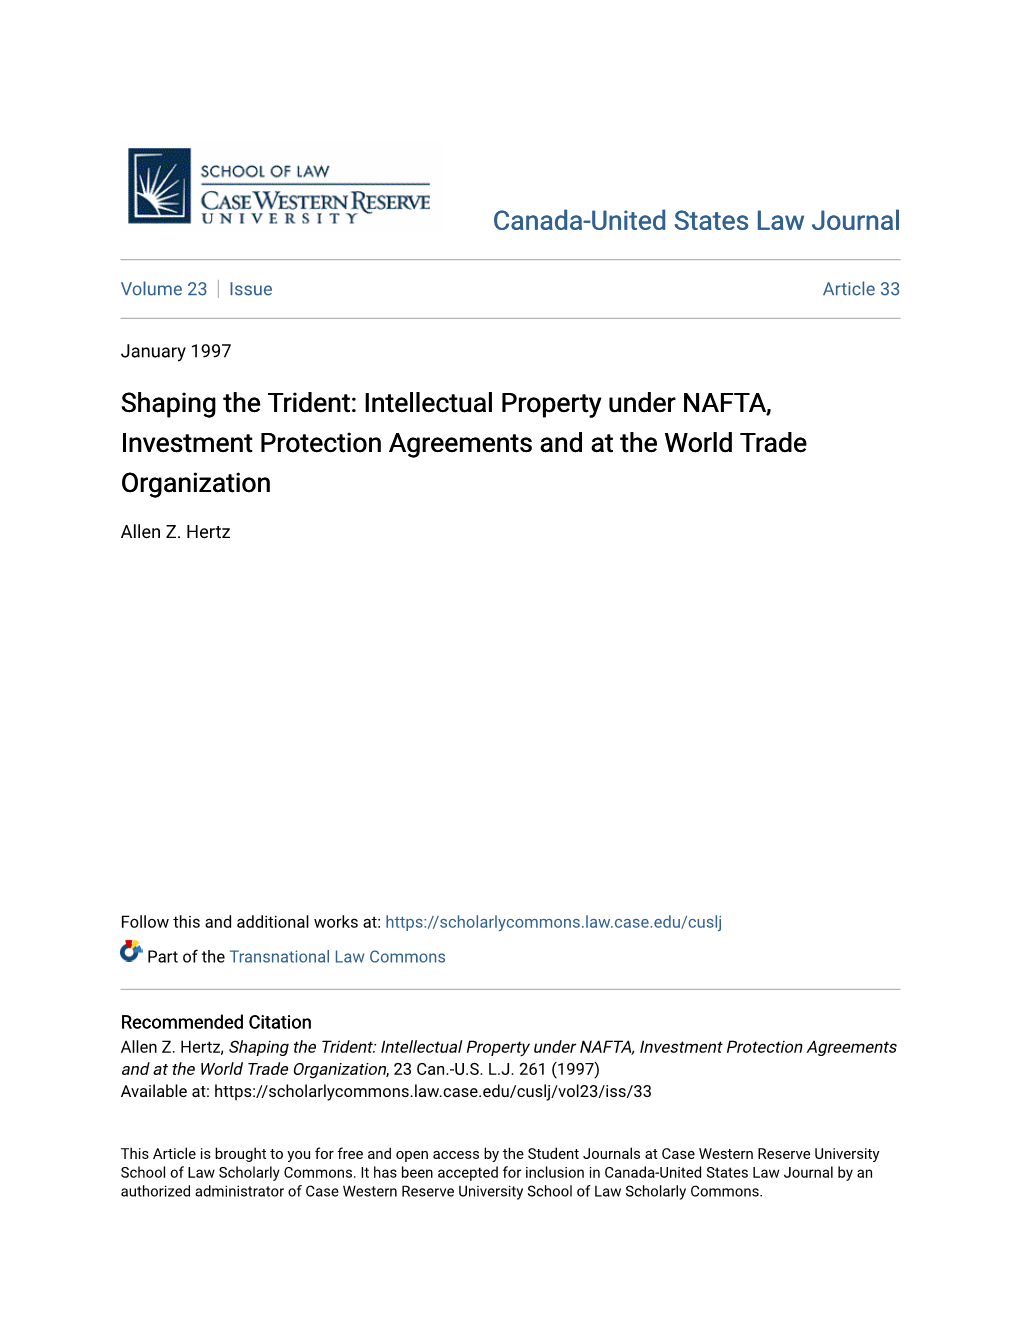 Intellectual Property Under NAFTA, Investment Protection Agreements and at the World Trade Organization